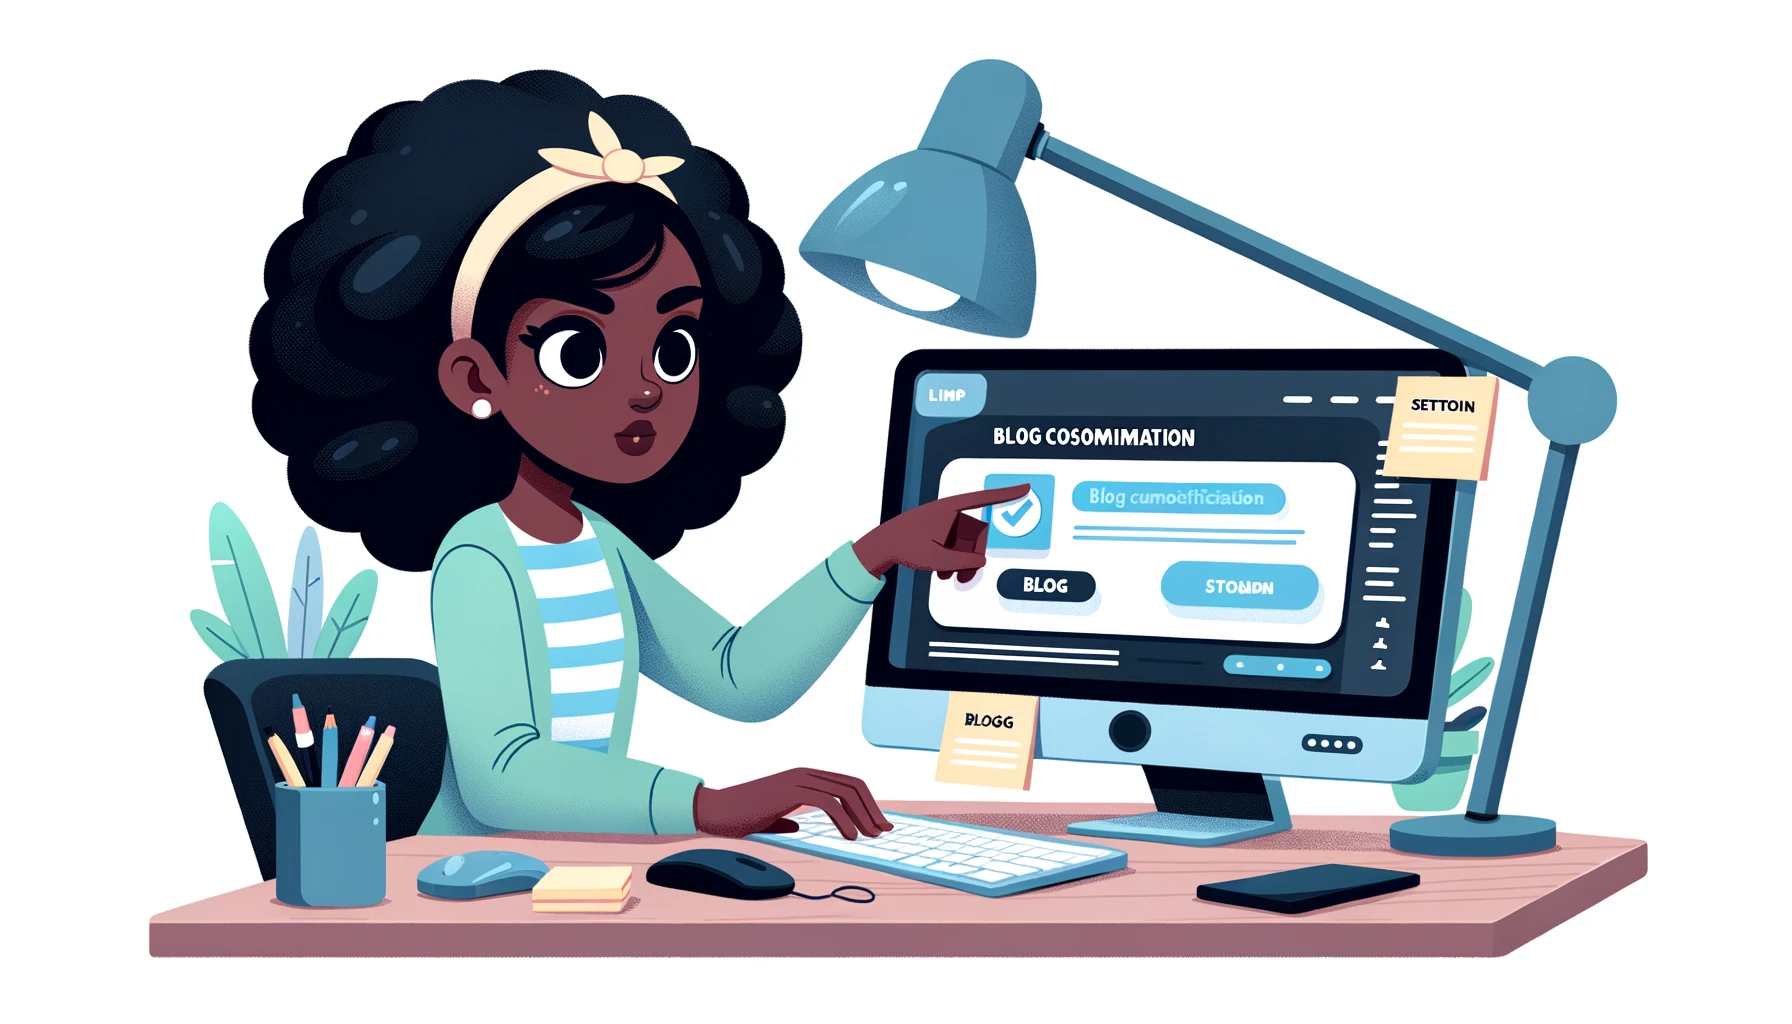 Cartoon representation of a focused female programmer with African descent, adjusting settings on her desktop computer. The monitor showcases a blog customization page. Around her are tech gadgets, sticky notes, and a lamp illuminating the desk.